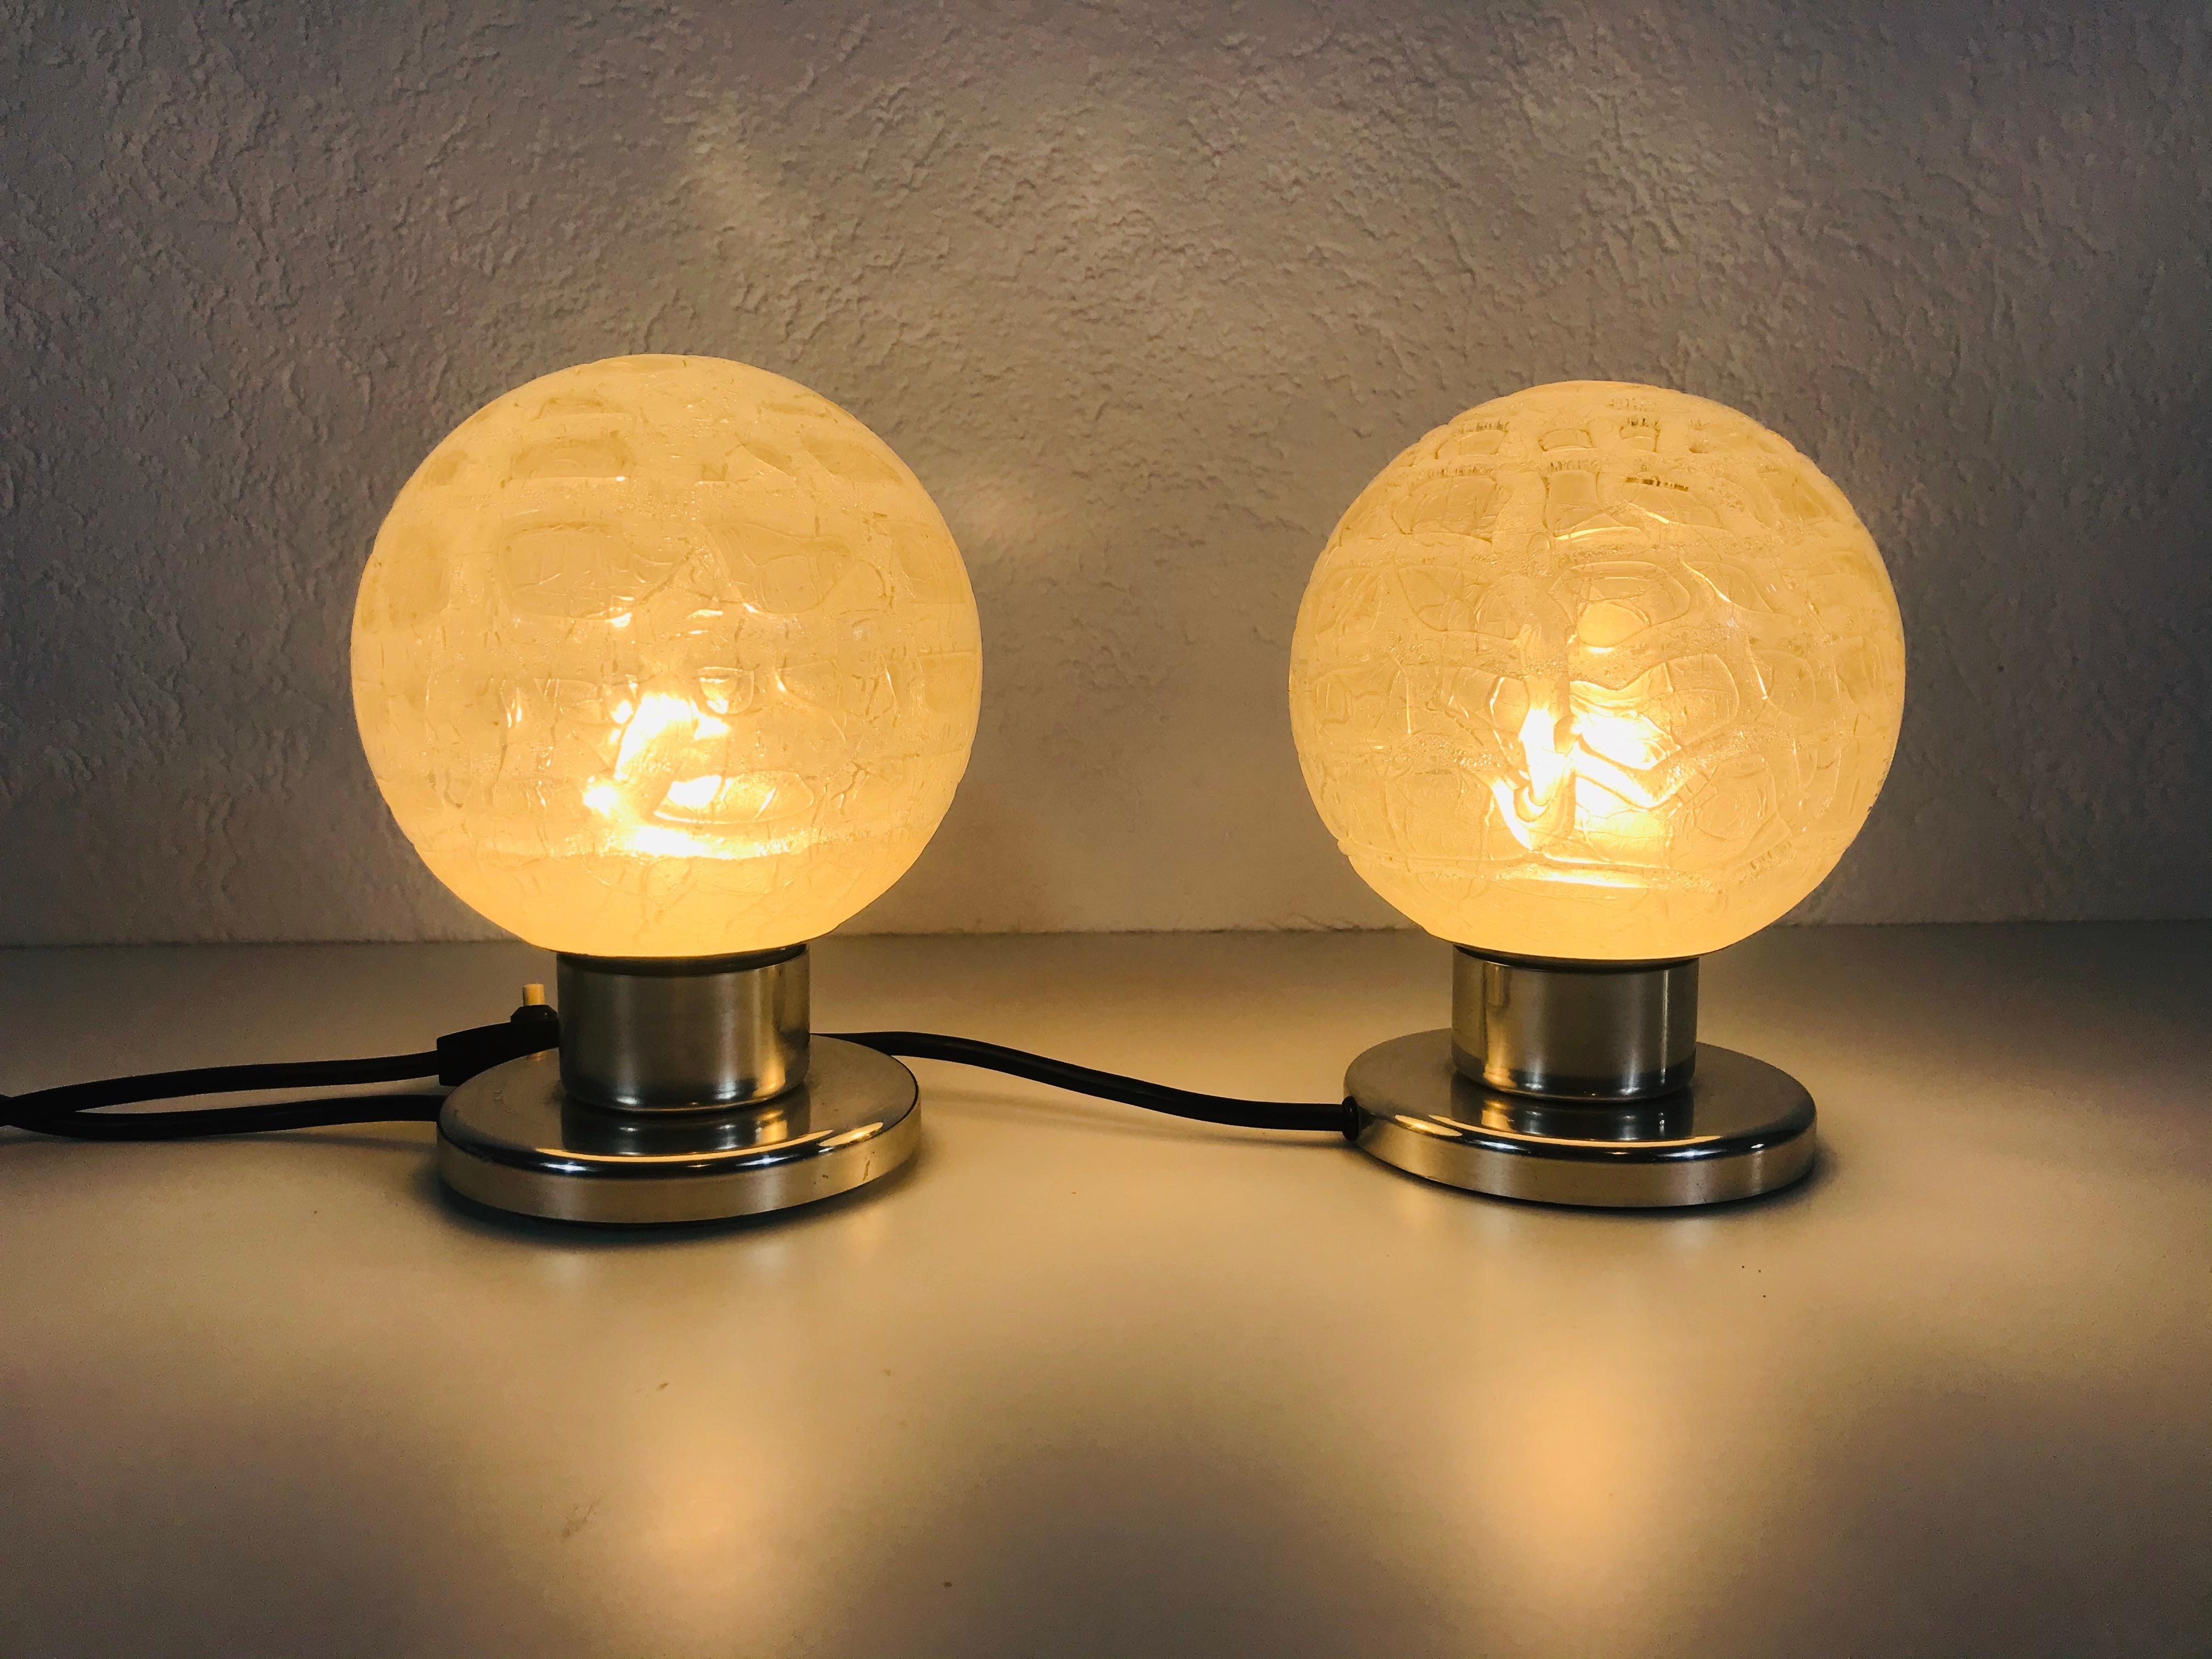 A beautiful pair of table lamps by Doria made in Germany in the 1970s. They have a brass base and the glass shades are made of frosted ice glass. They are in very good vintage condition.

The light requires one E14 light bulb.